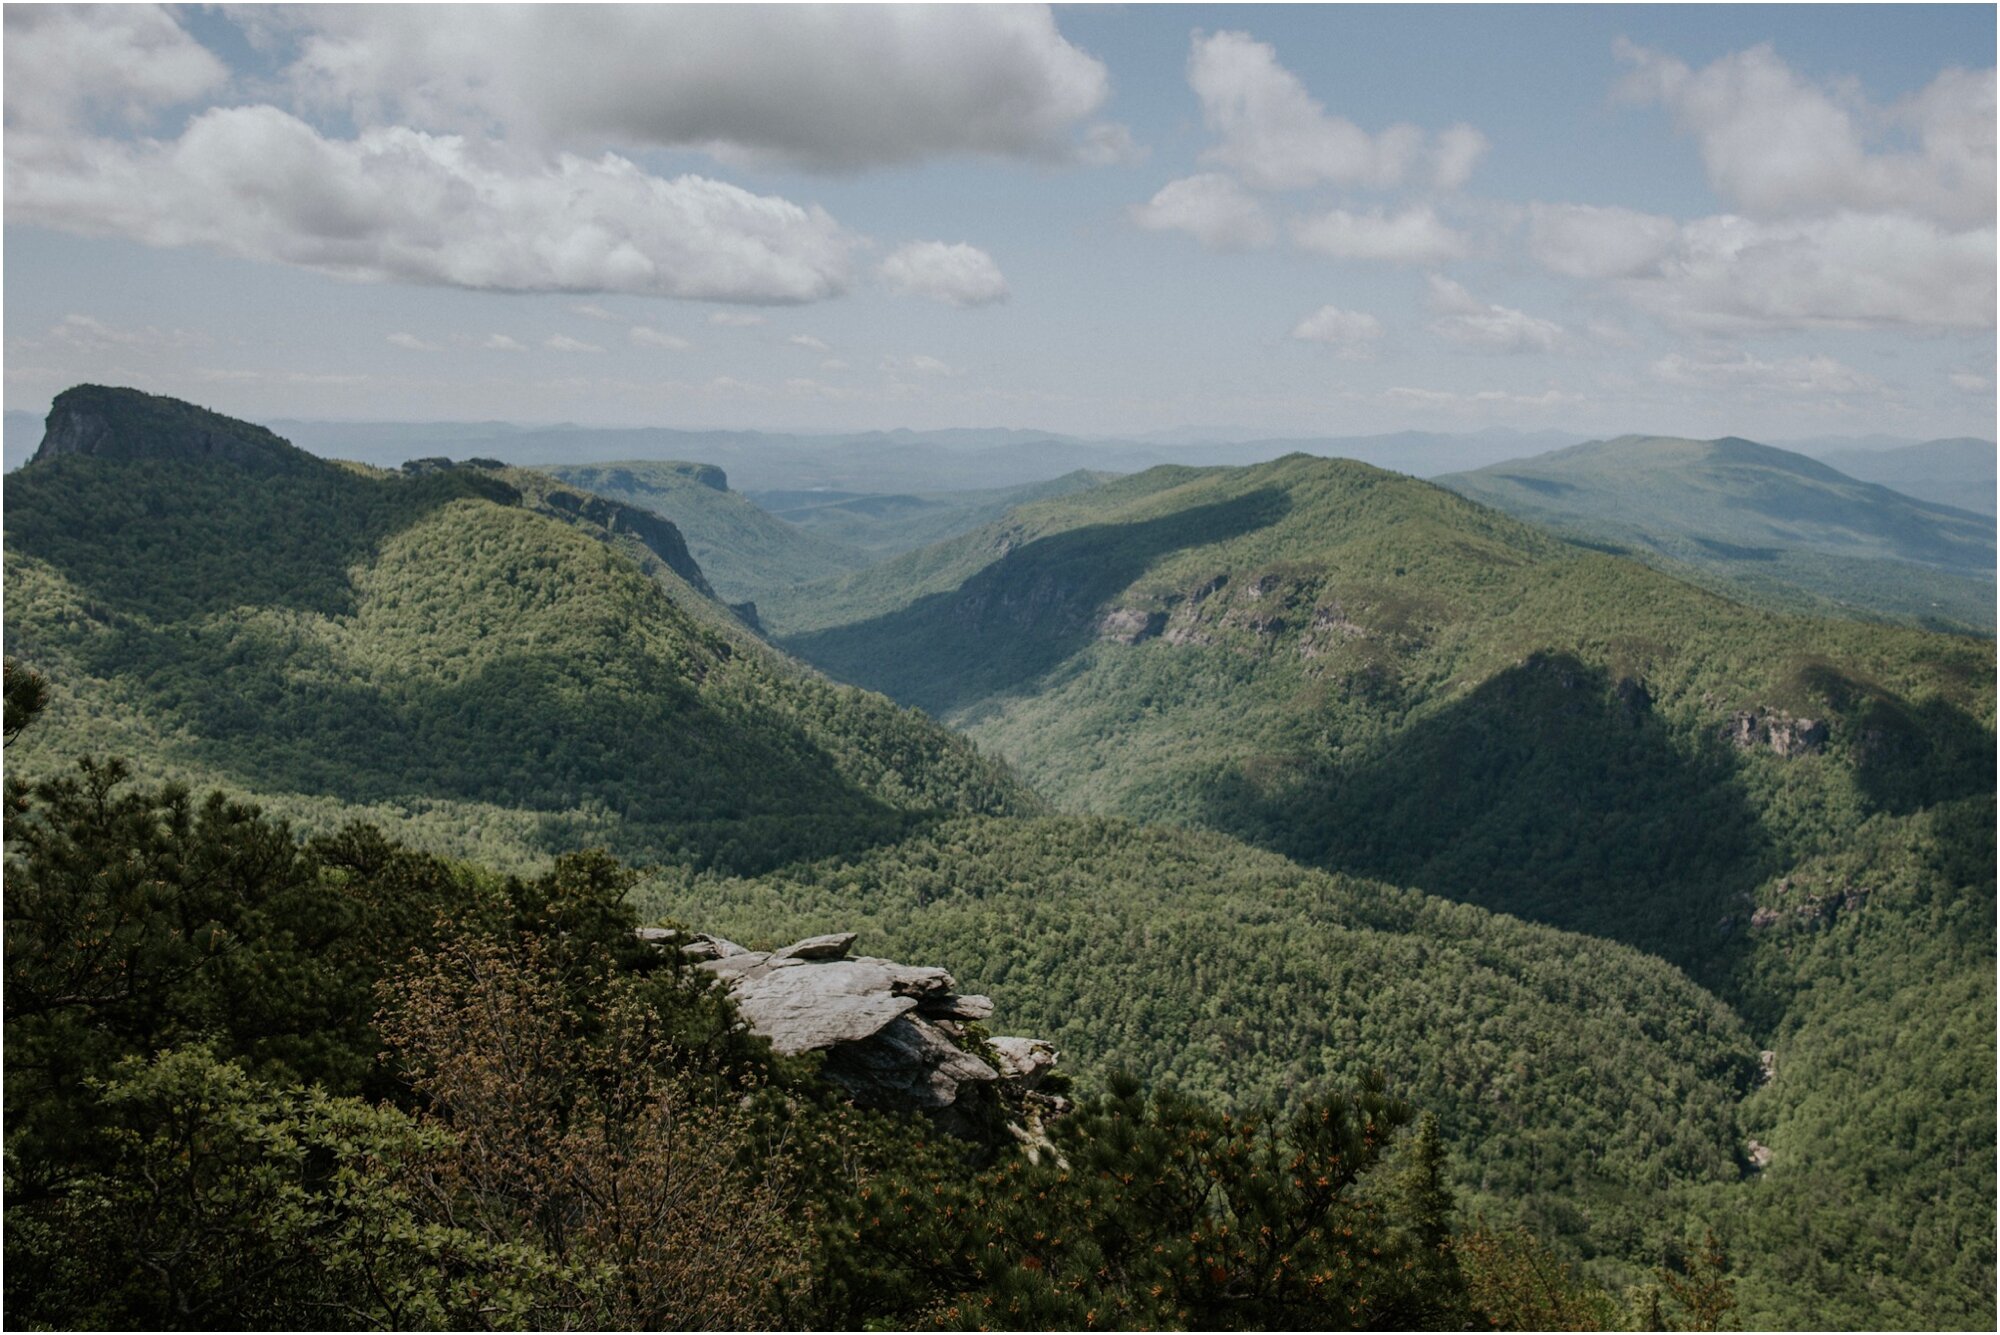   On this hike, I realized just how amazing North Carolina is.  